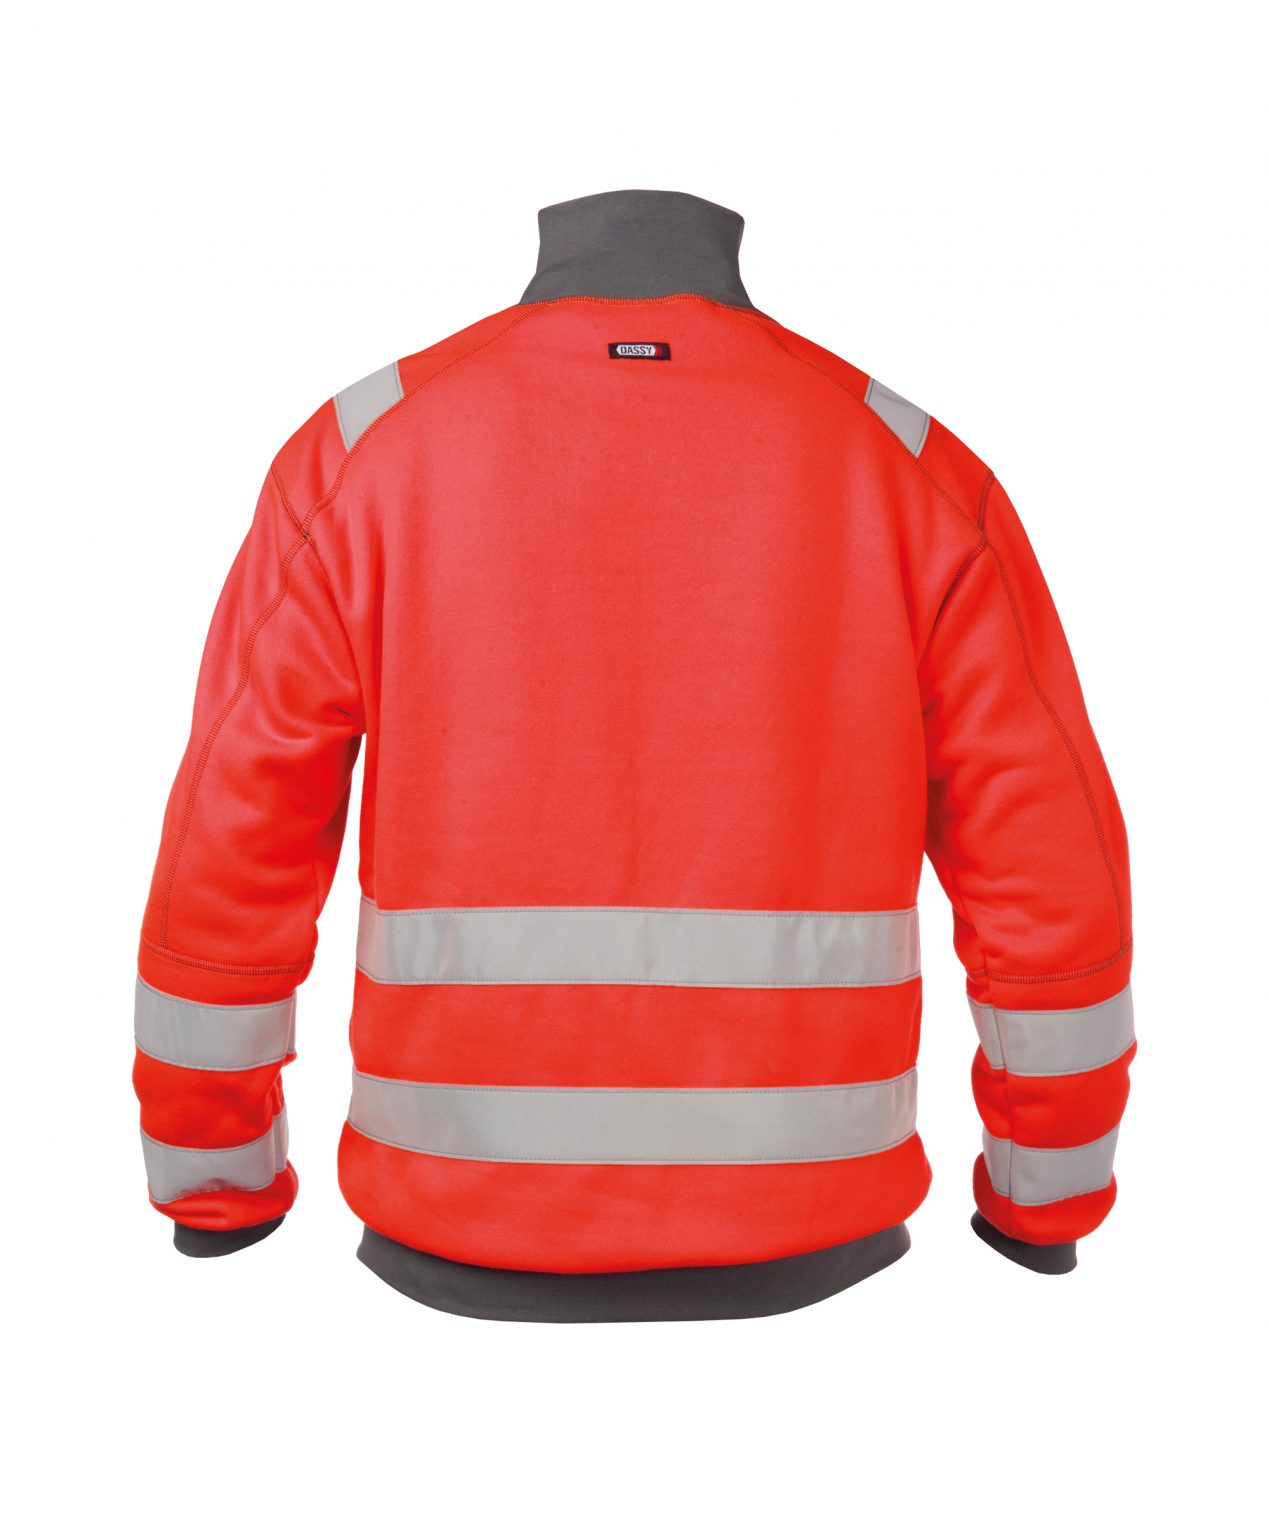 denver high visibility sweatshirt fluo red cement grey back